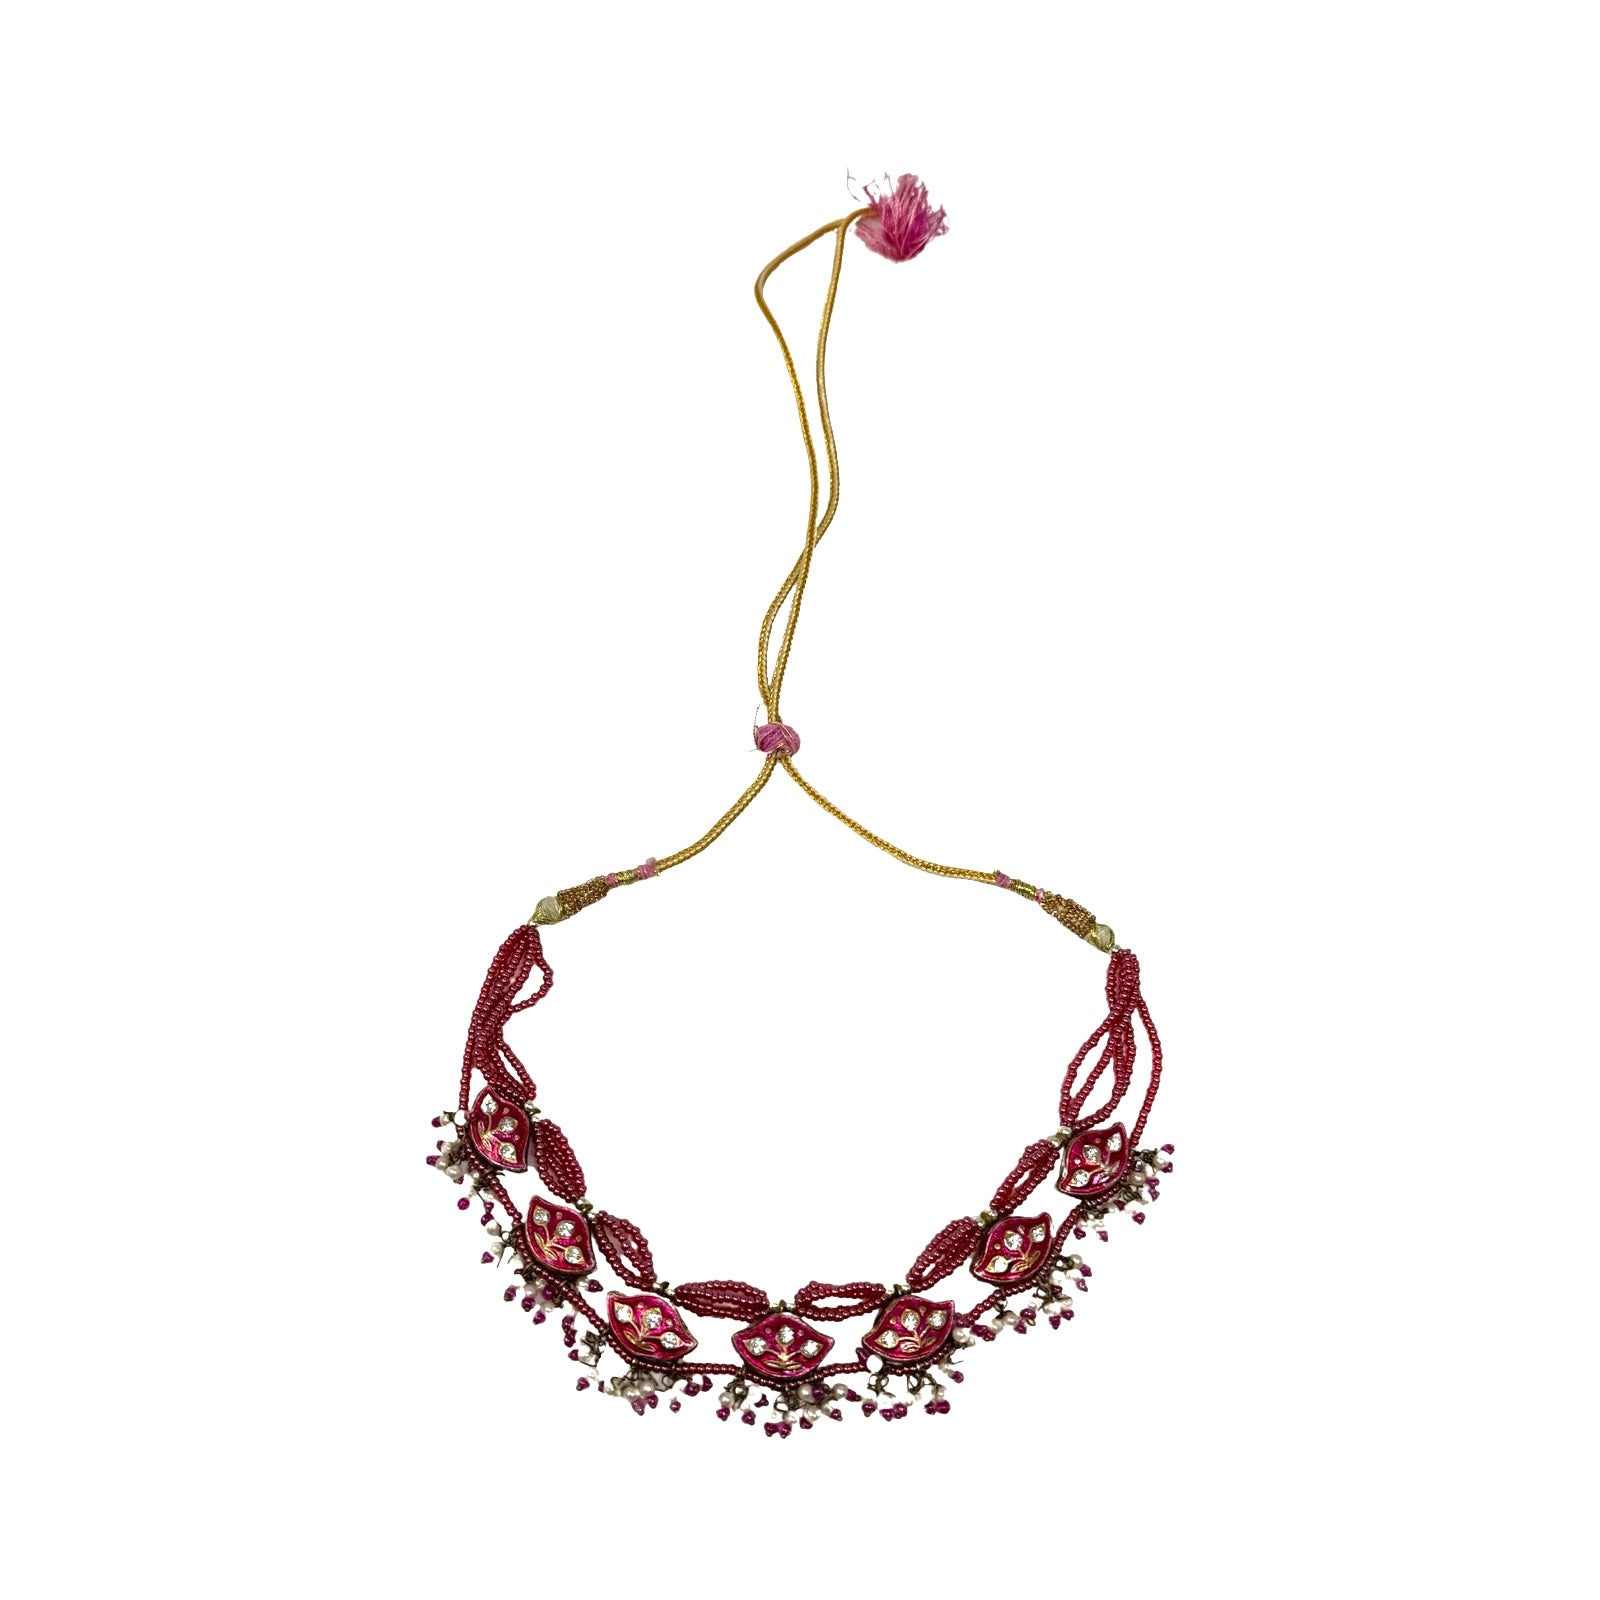 Beaded And Embellished Adjustable Cord Necklace